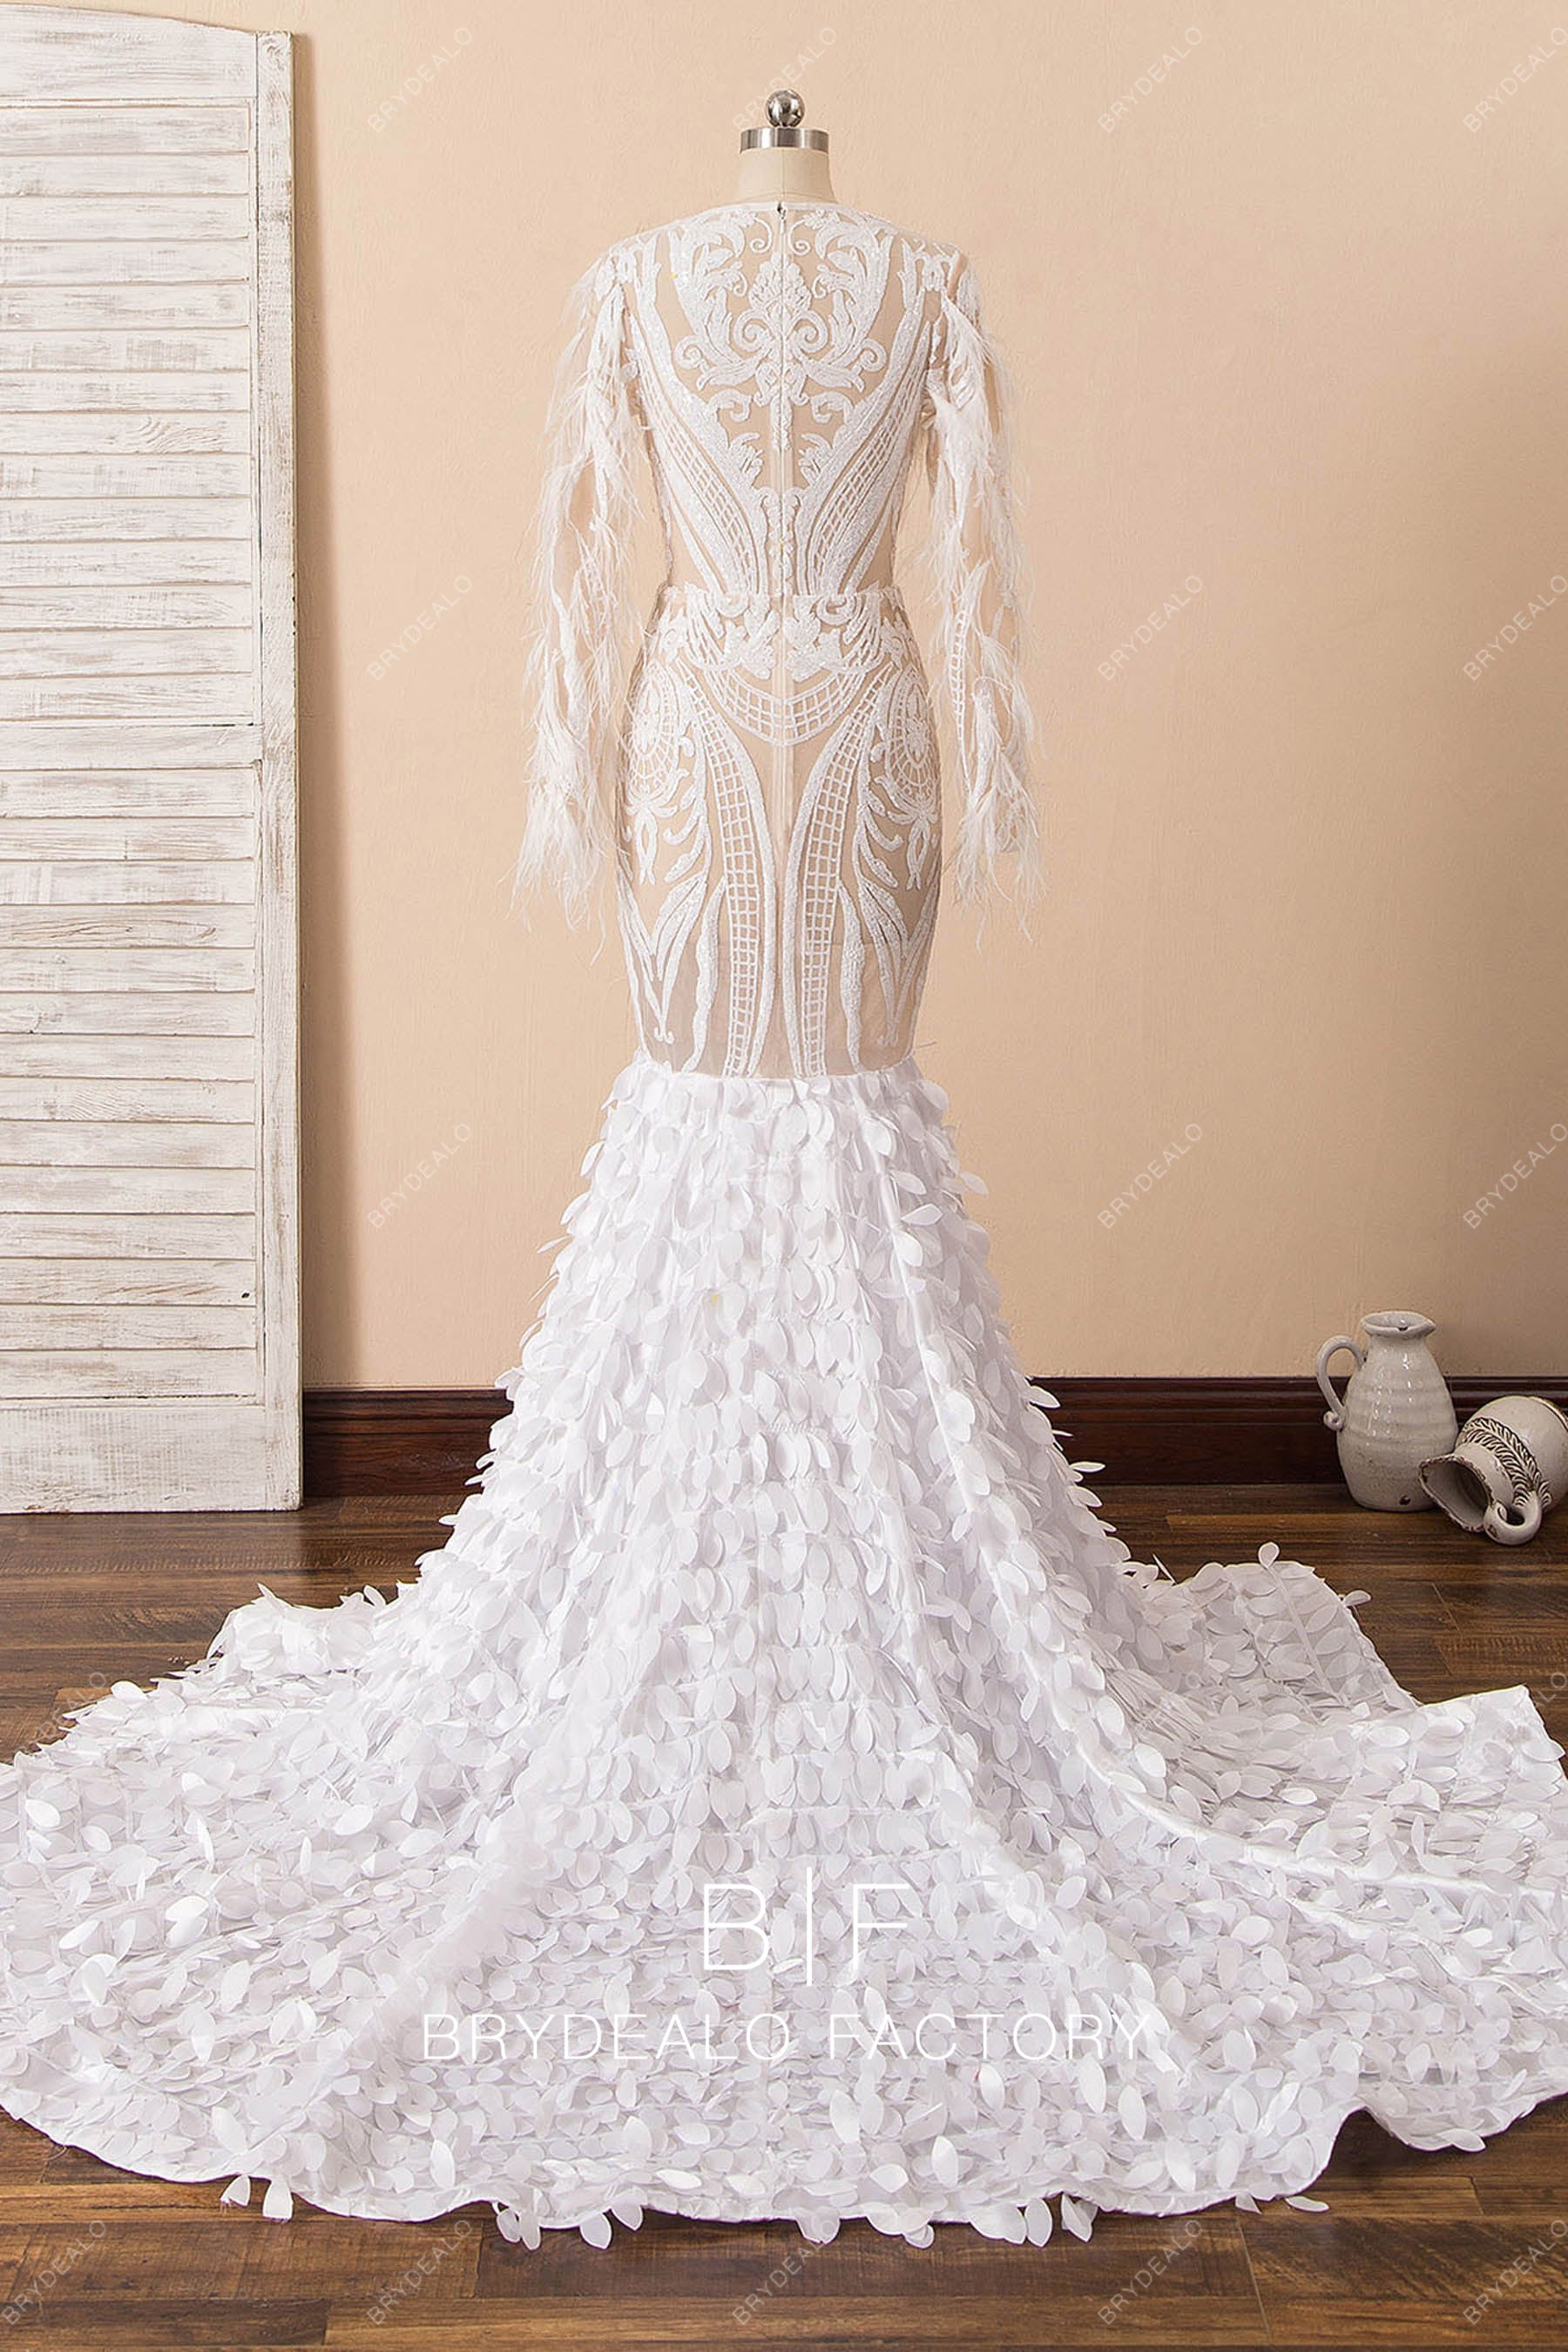 THICK STRAP LACE MERMAID WEDDING GOWN - Dave & Johnny